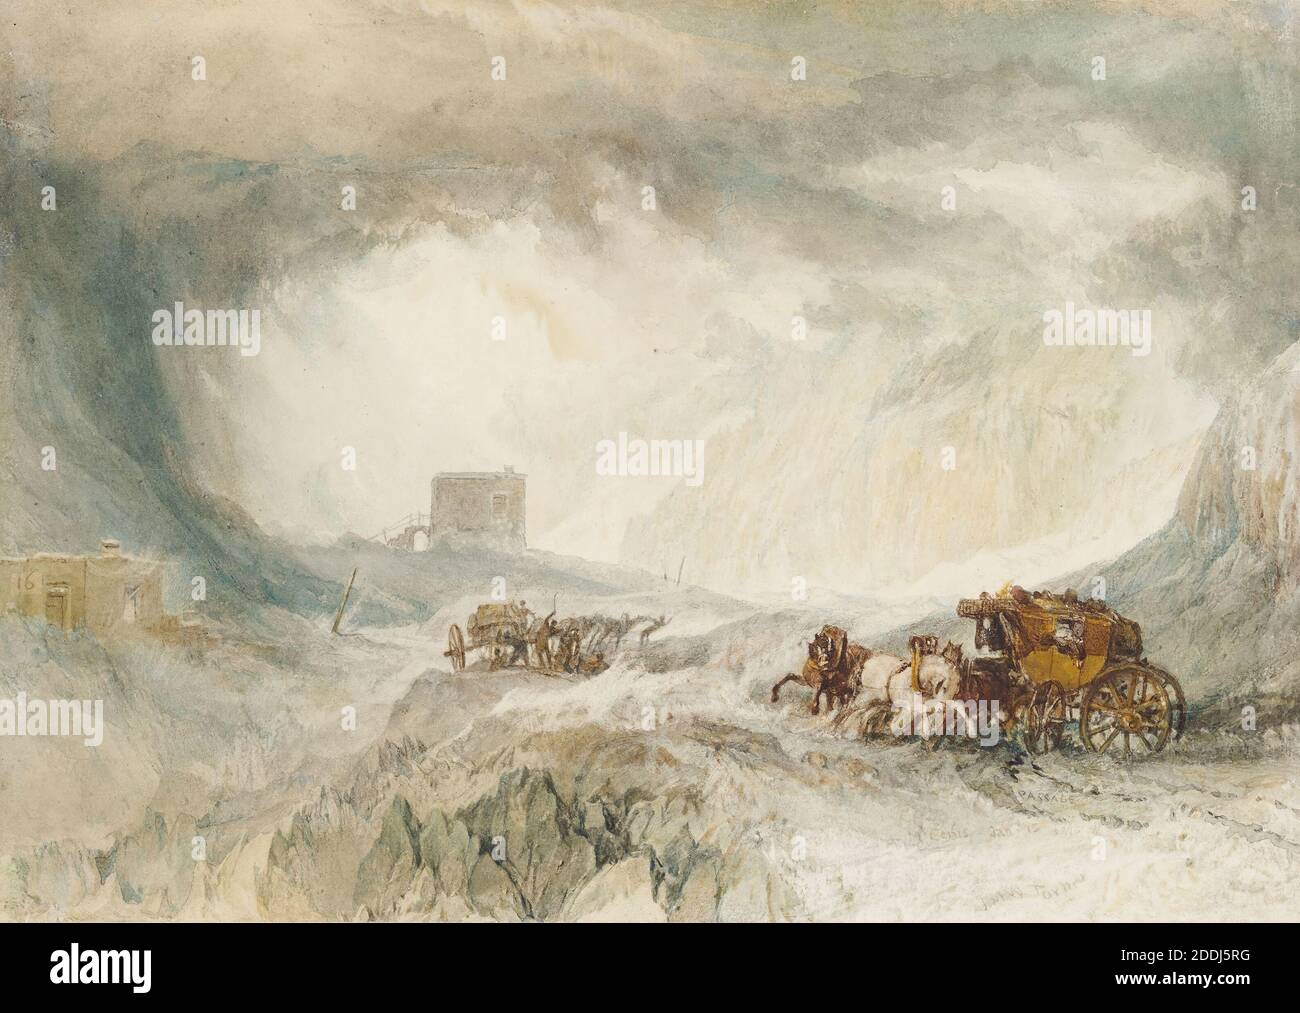 Snowstorm, Mont Cenis, 1820 JMW Turner, Landscape, Mountain, Alps, Snow, Watercolour, Transport, Frame, Animal, Horse, Season, Winter, Weather, Storm, Carriage, Works on Paper Stock Photo